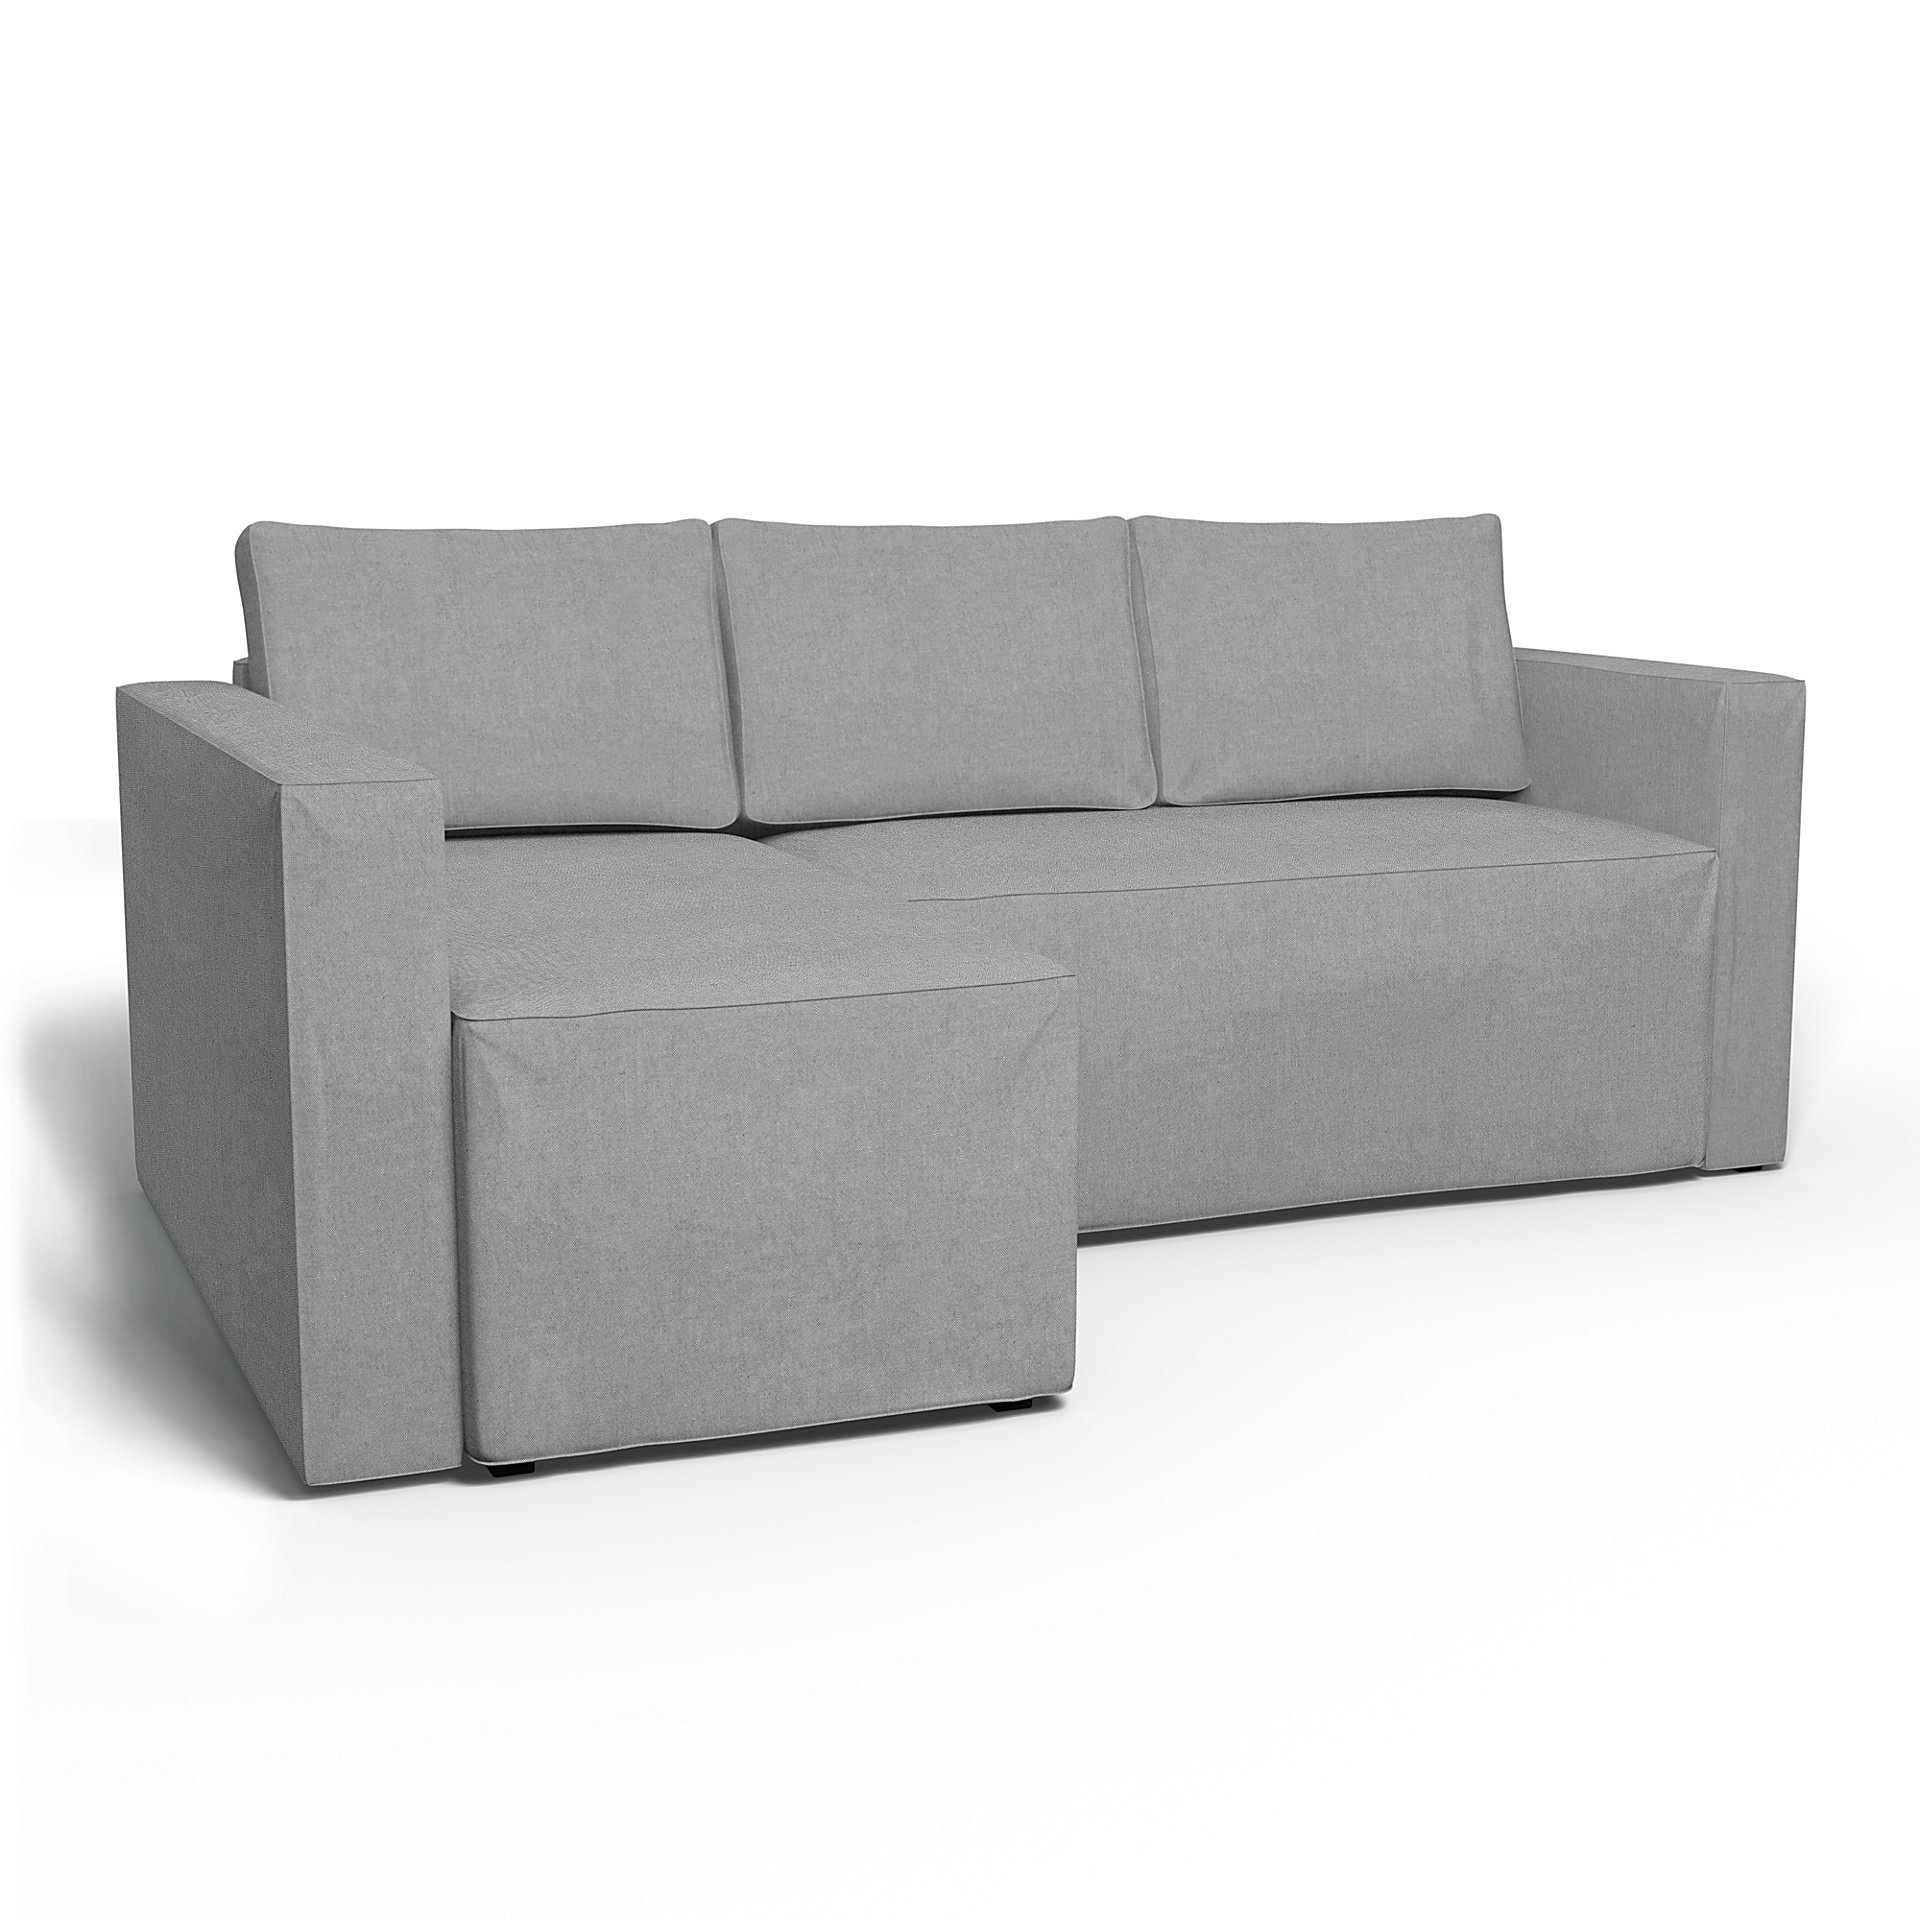 IKEA - Manstad Sofa Bed with Left Chaise Cover, Graphite, Linen - Bemz